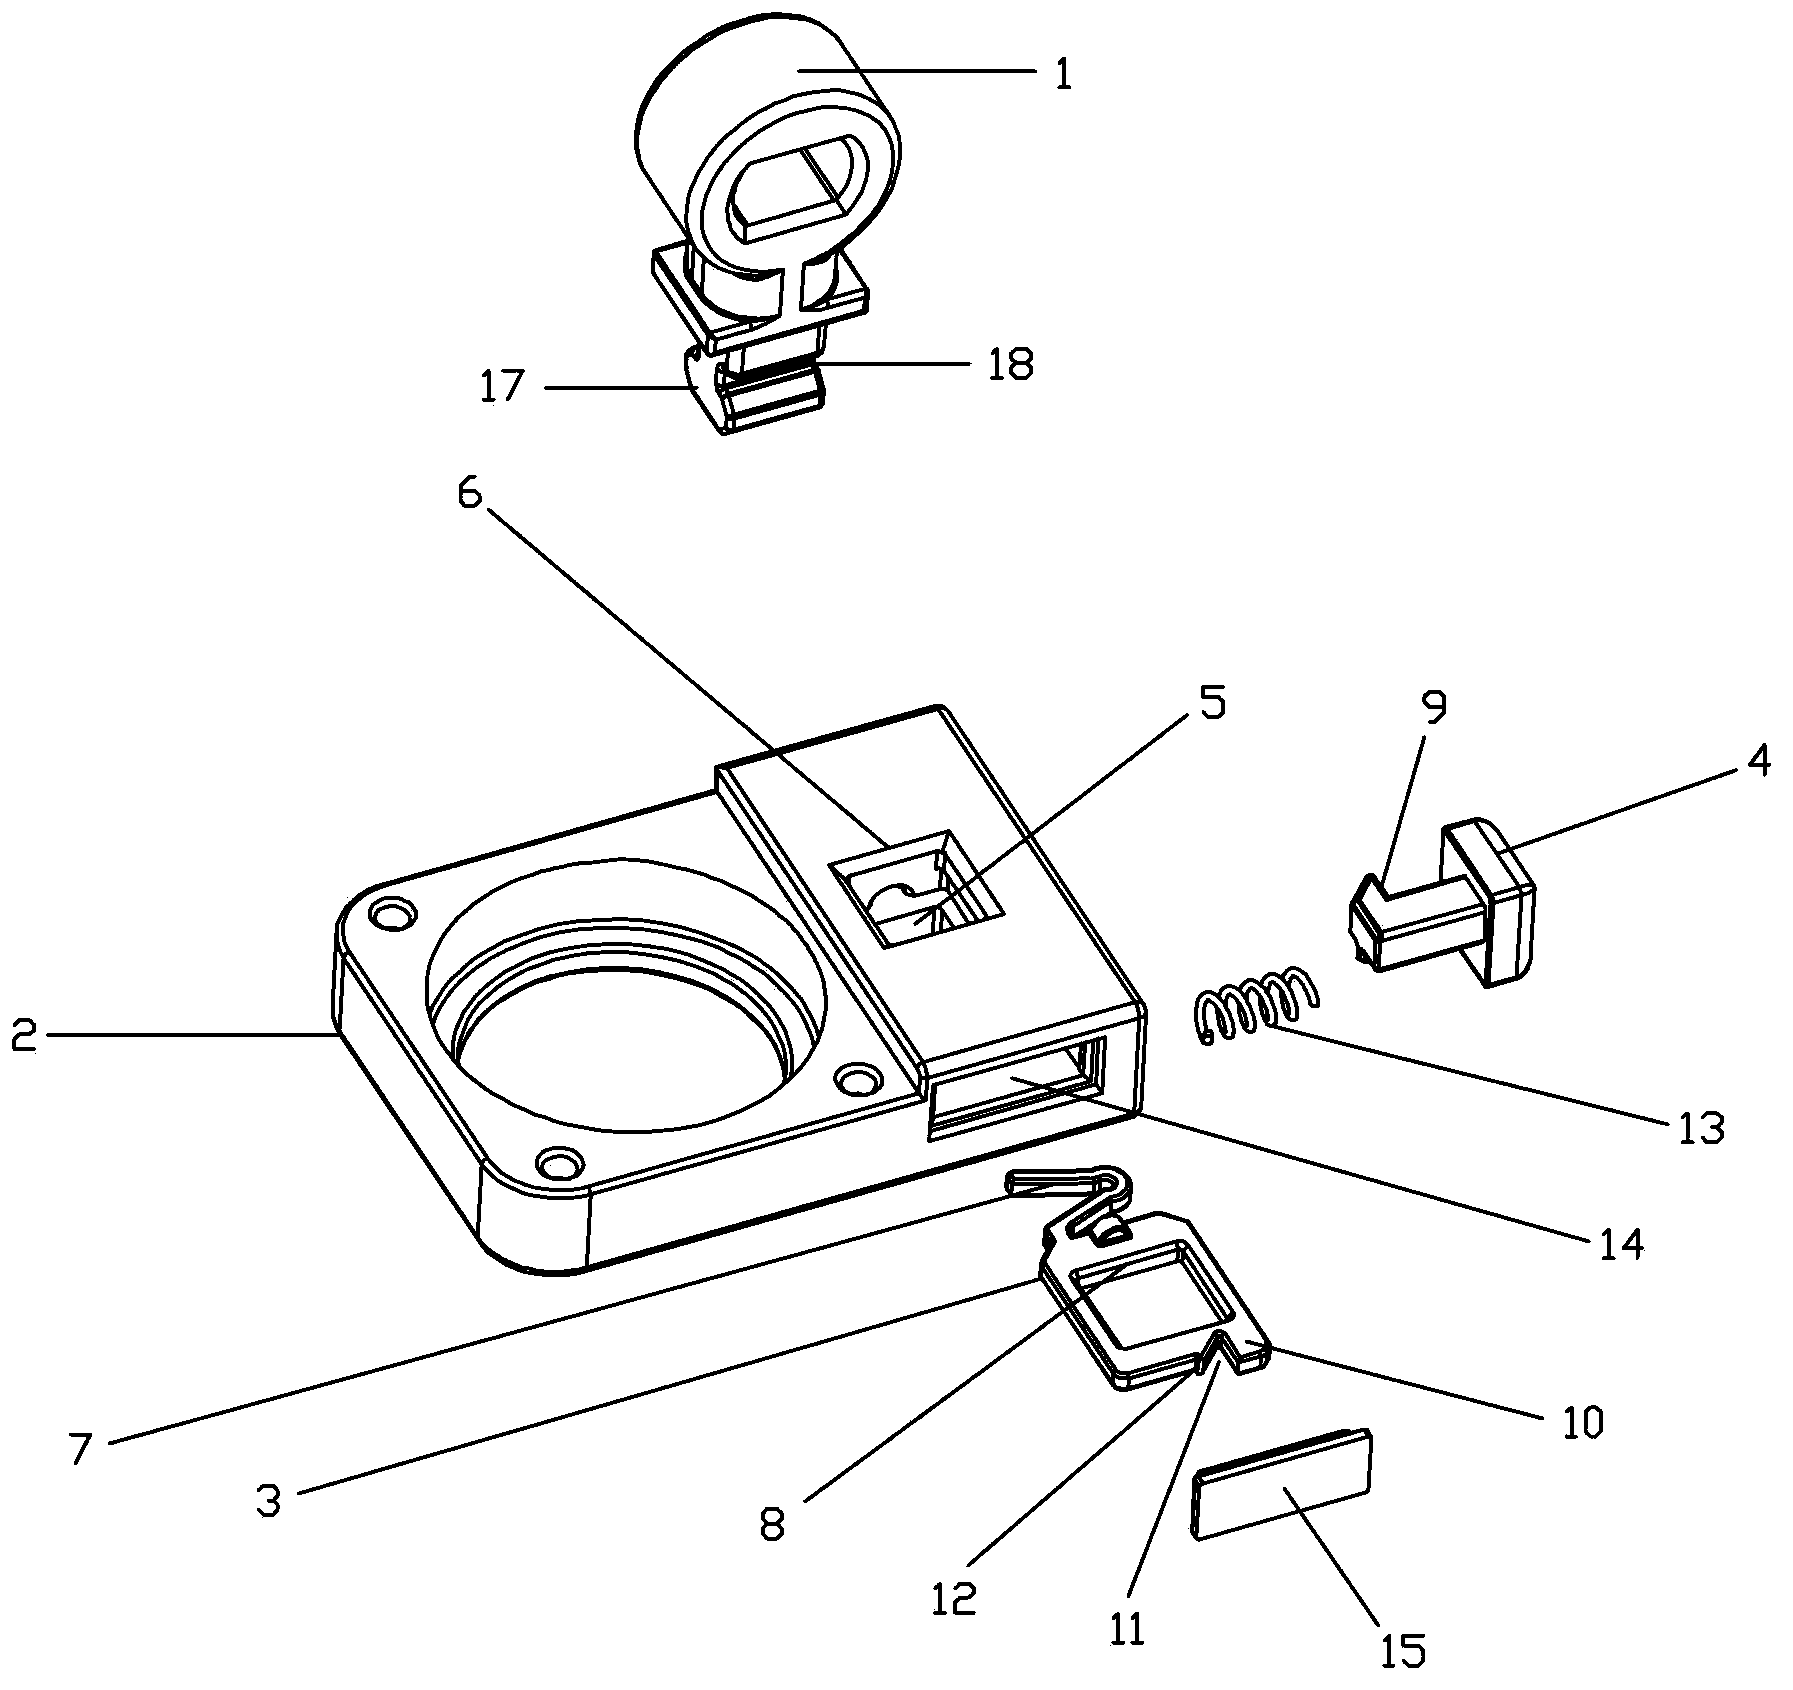 Device for rapidly disassembling and assembling toilet bowl cover plate assembly